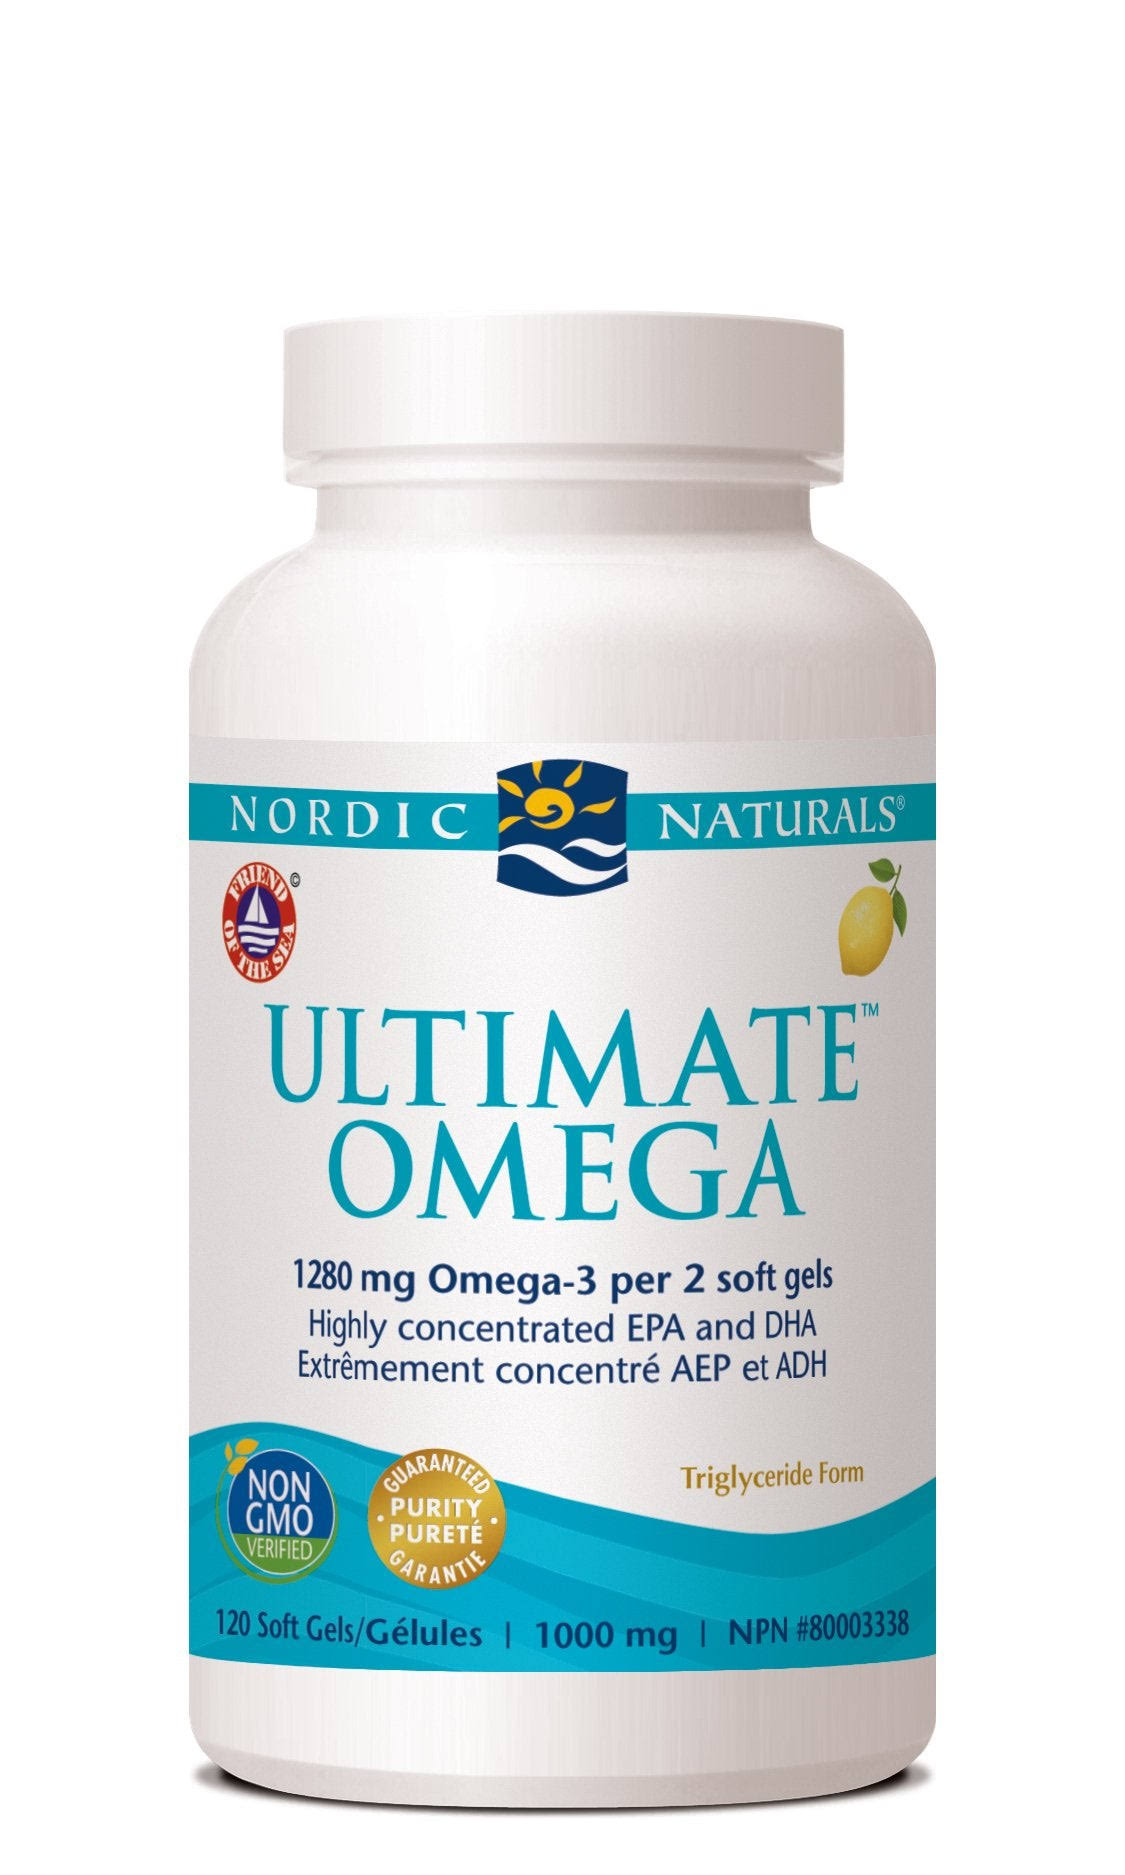 Nordic Naturals Ultimate Omega Dietary Supplement - 120ct